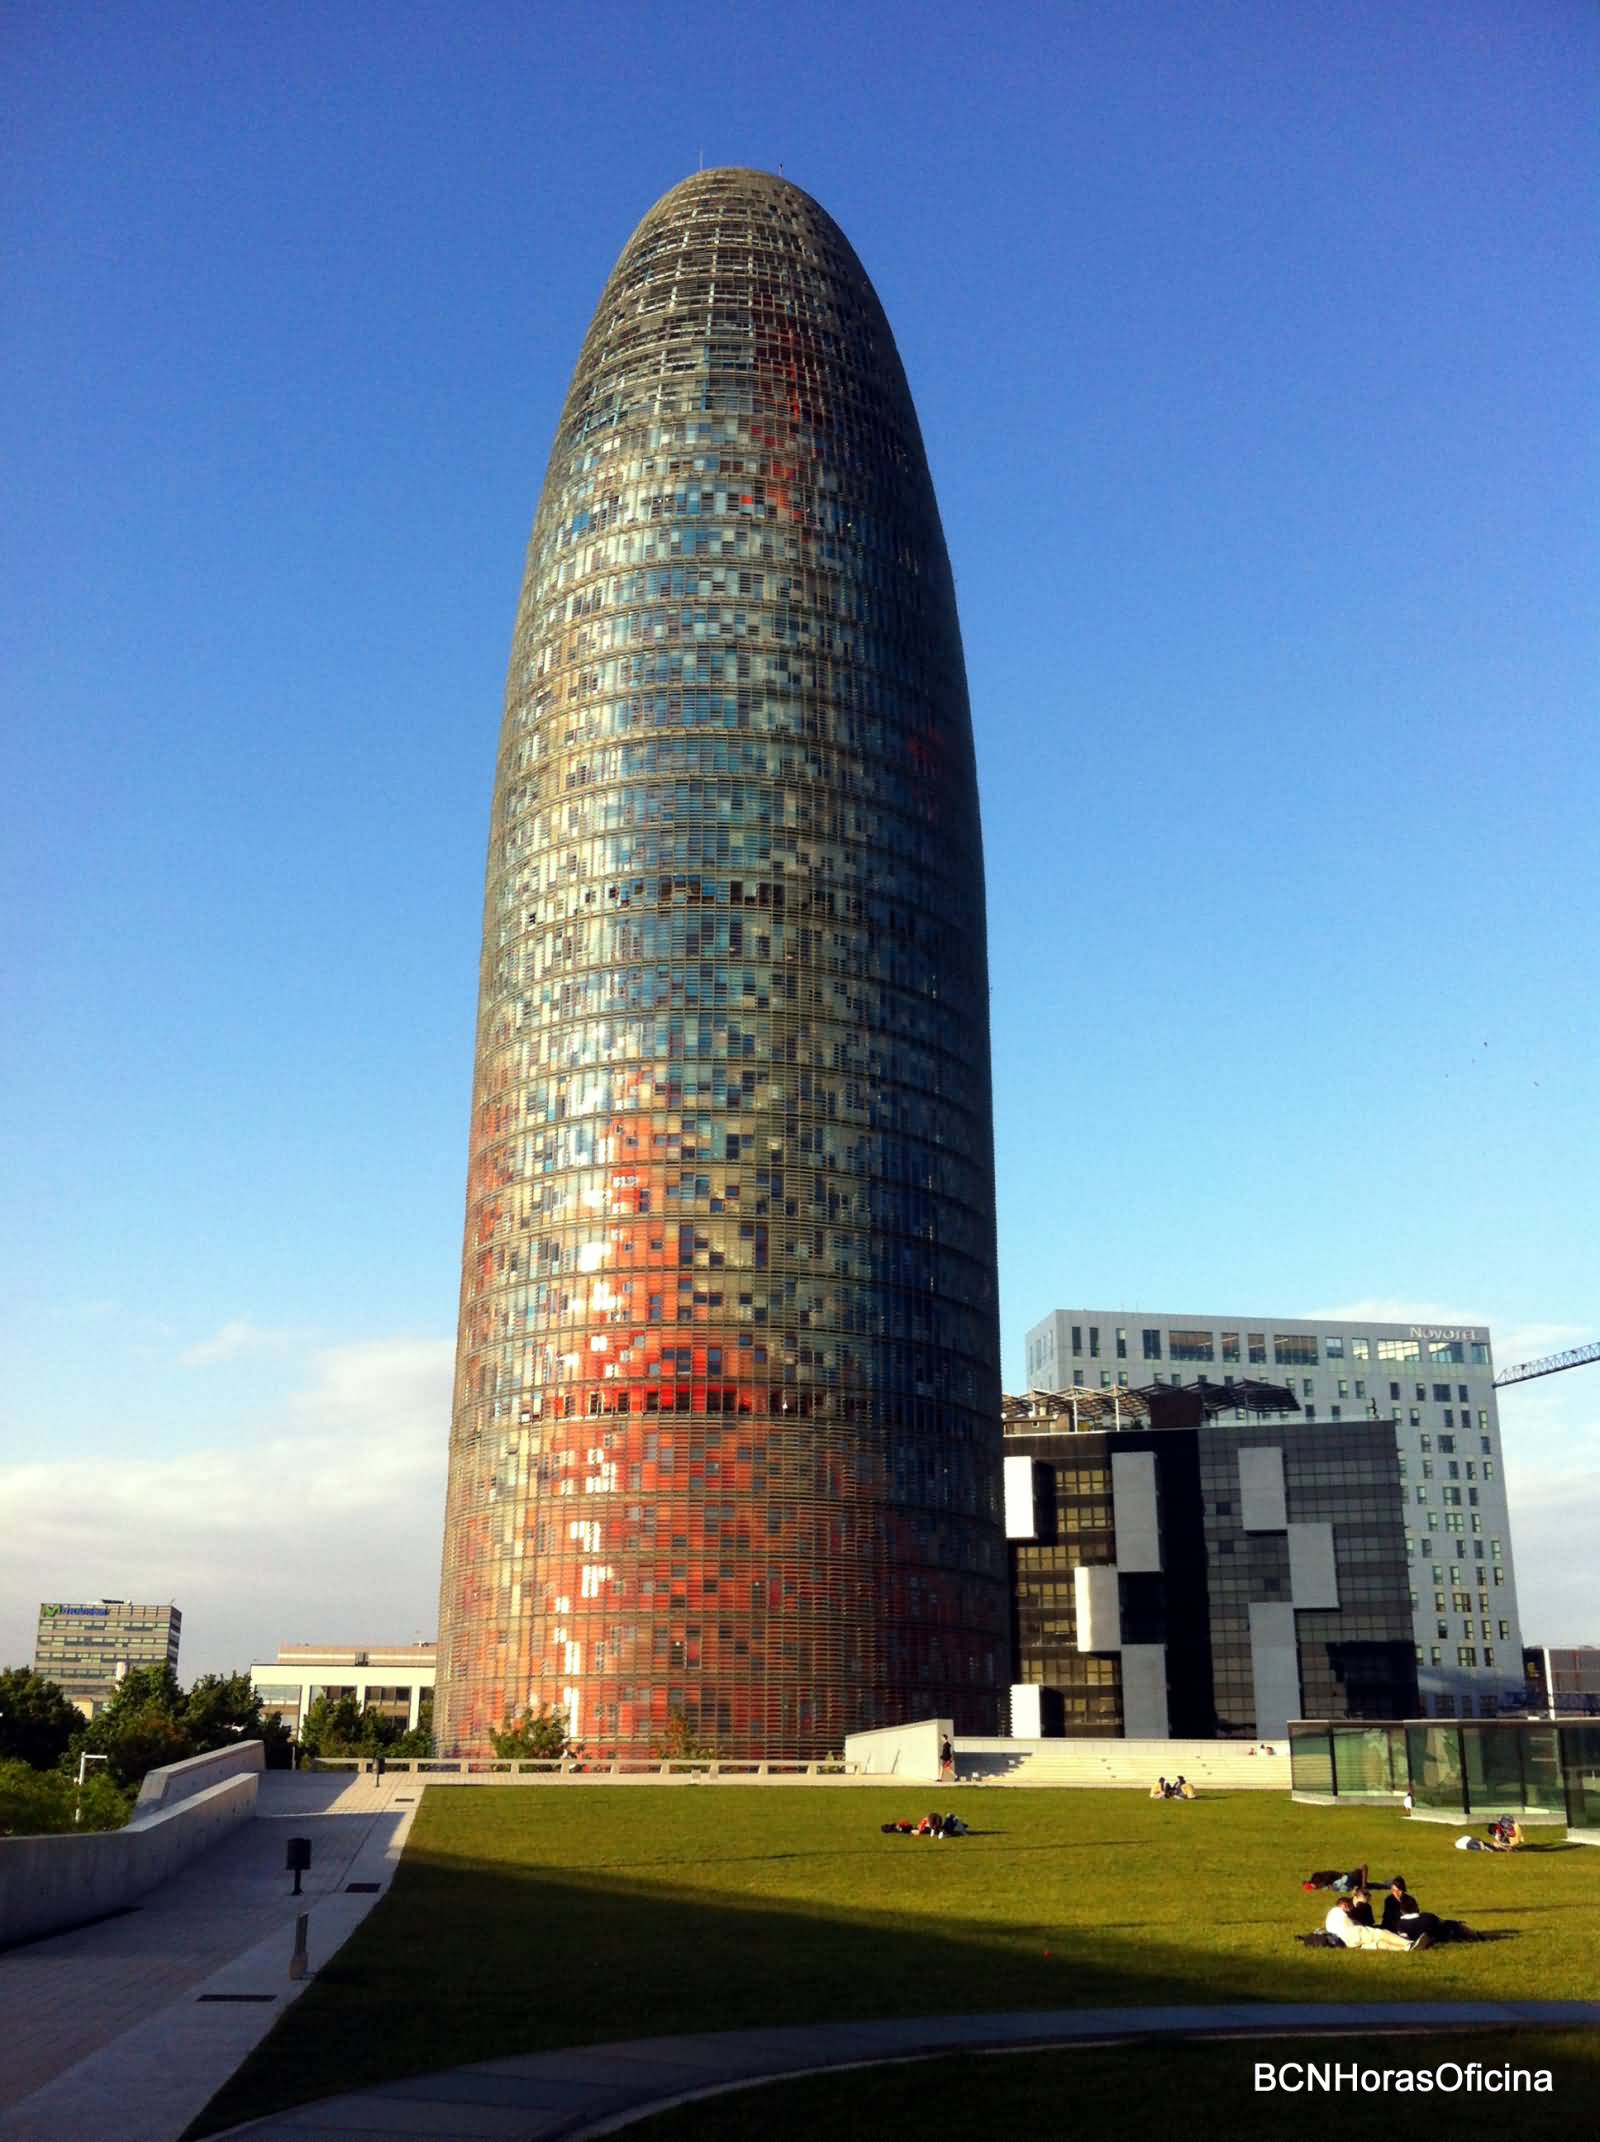 The Torre Agbar View